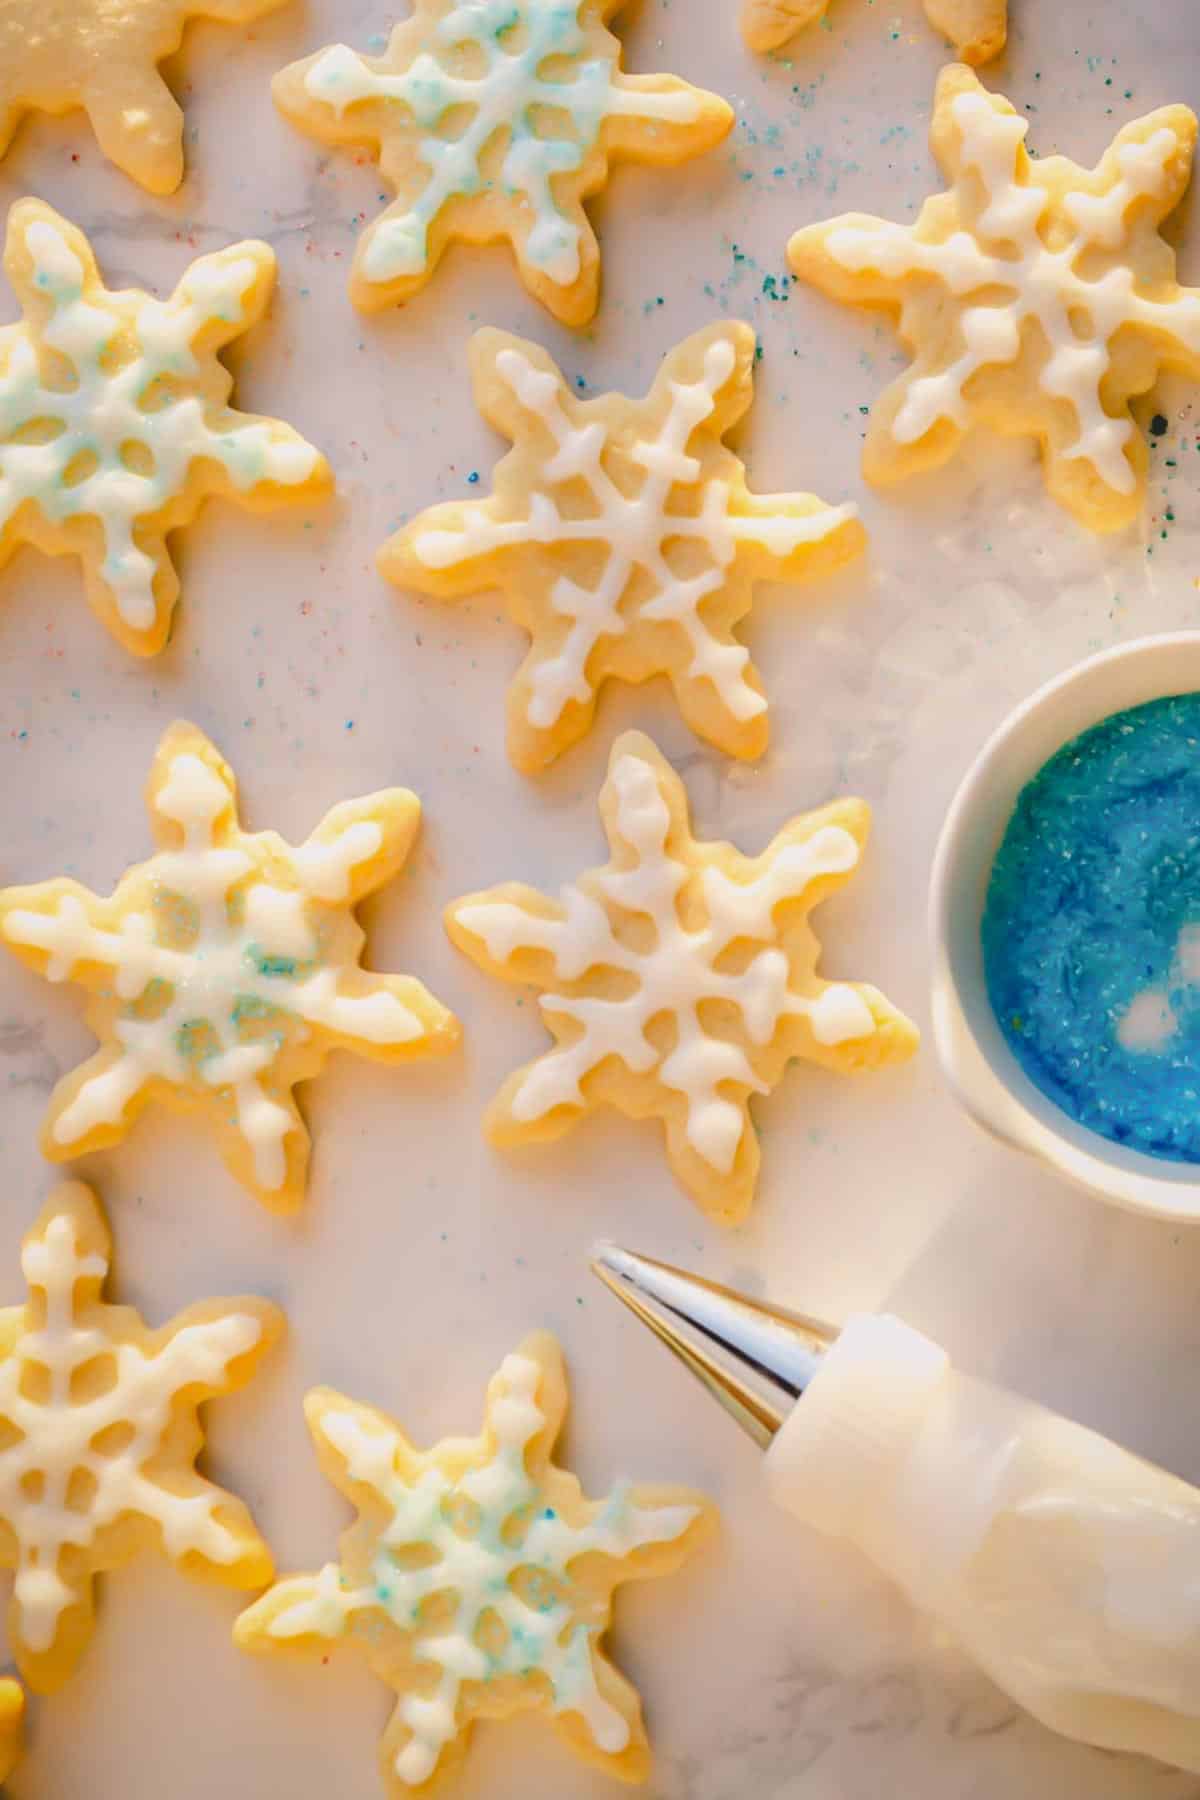 Snowflake shaped cookies decorated with powdered sugar glaze and blue icing sugar.